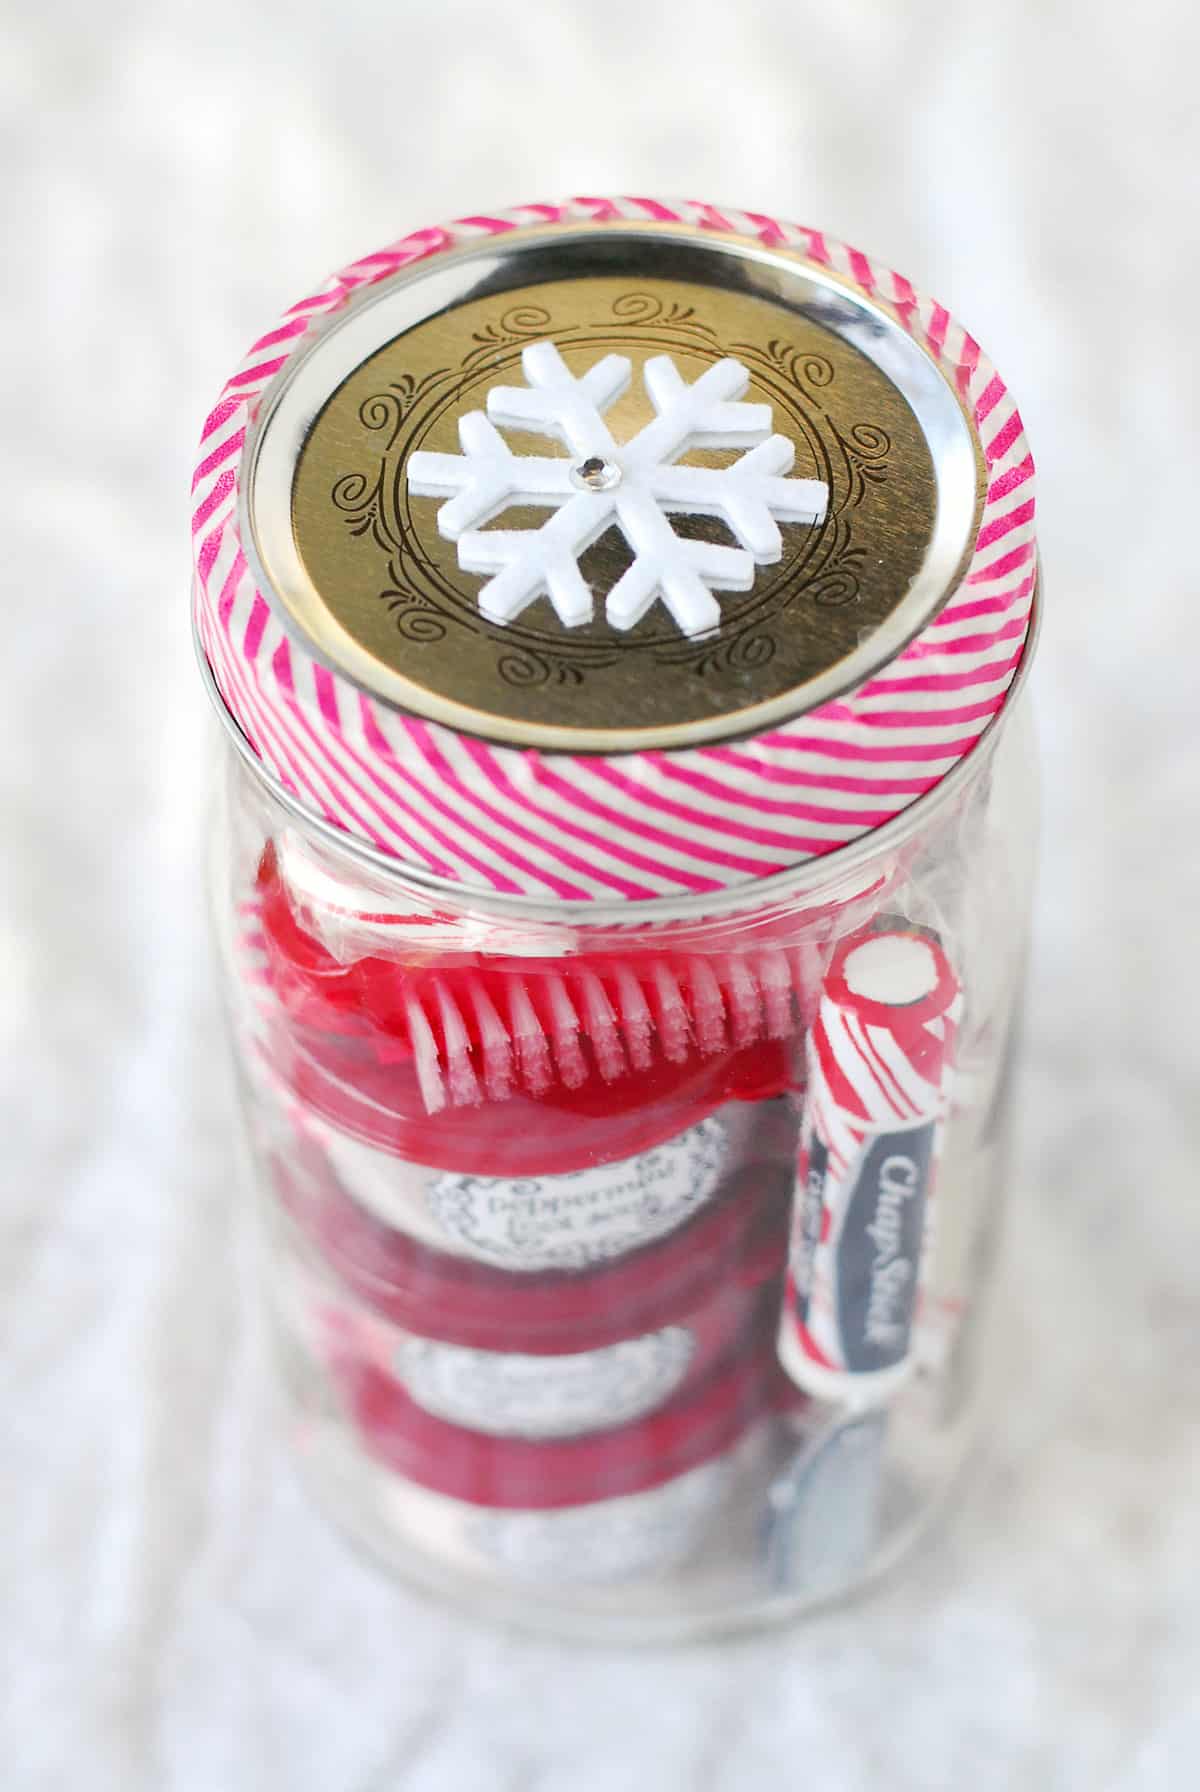 Add a snowflake to the top of the jar.